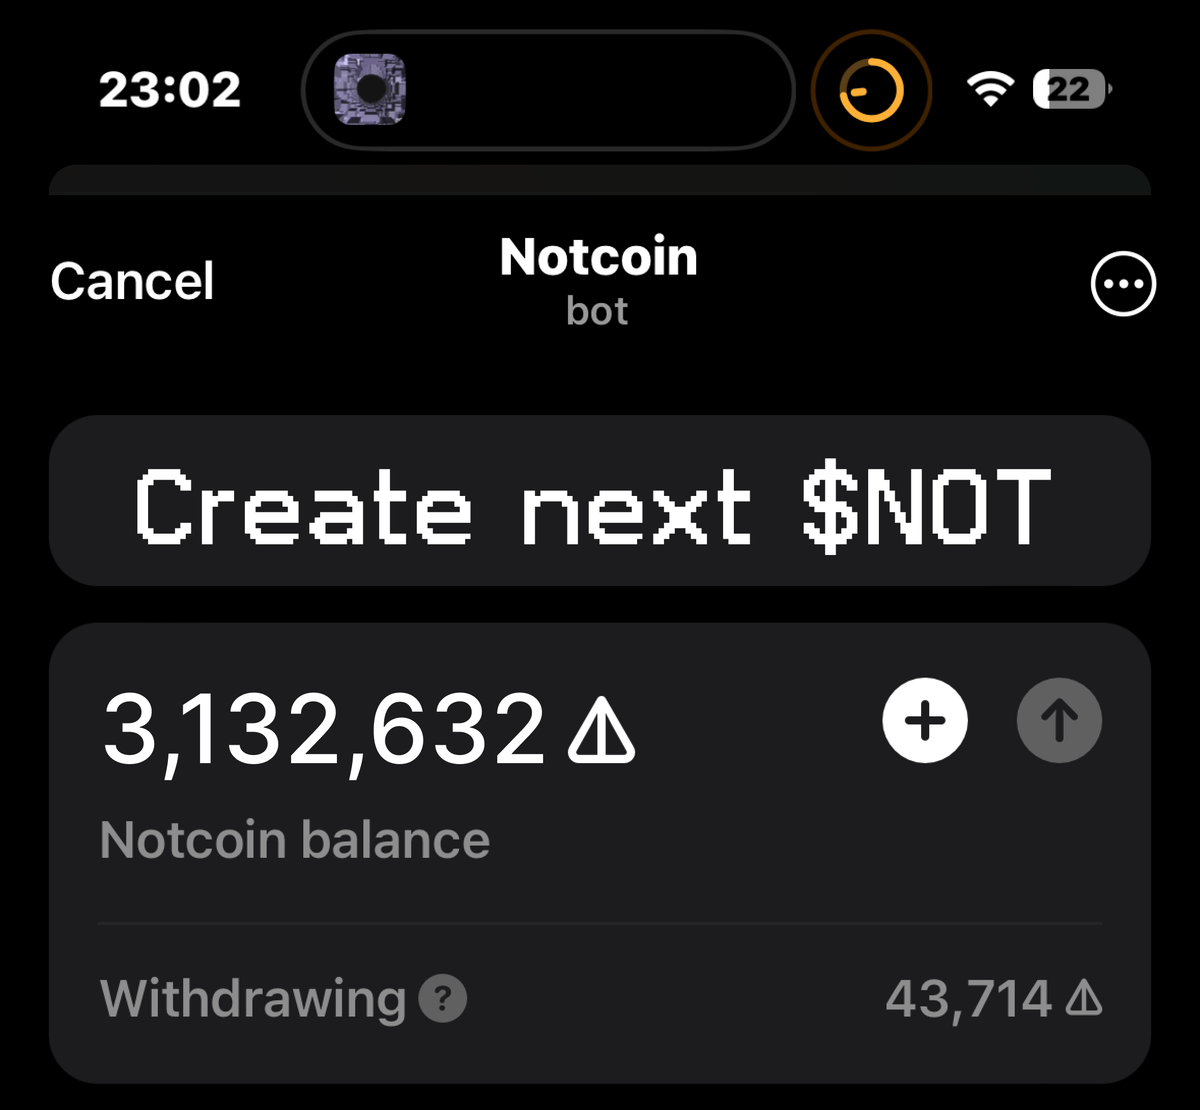 $NOT just hit $1B mcap and growing 📈

Creators of $NOT made millions, but you can do the same!

Launching memecoin on $TON has never been this easy.

Create next $NOT, NO CODING SKILLS REQUIRED 🧵👇